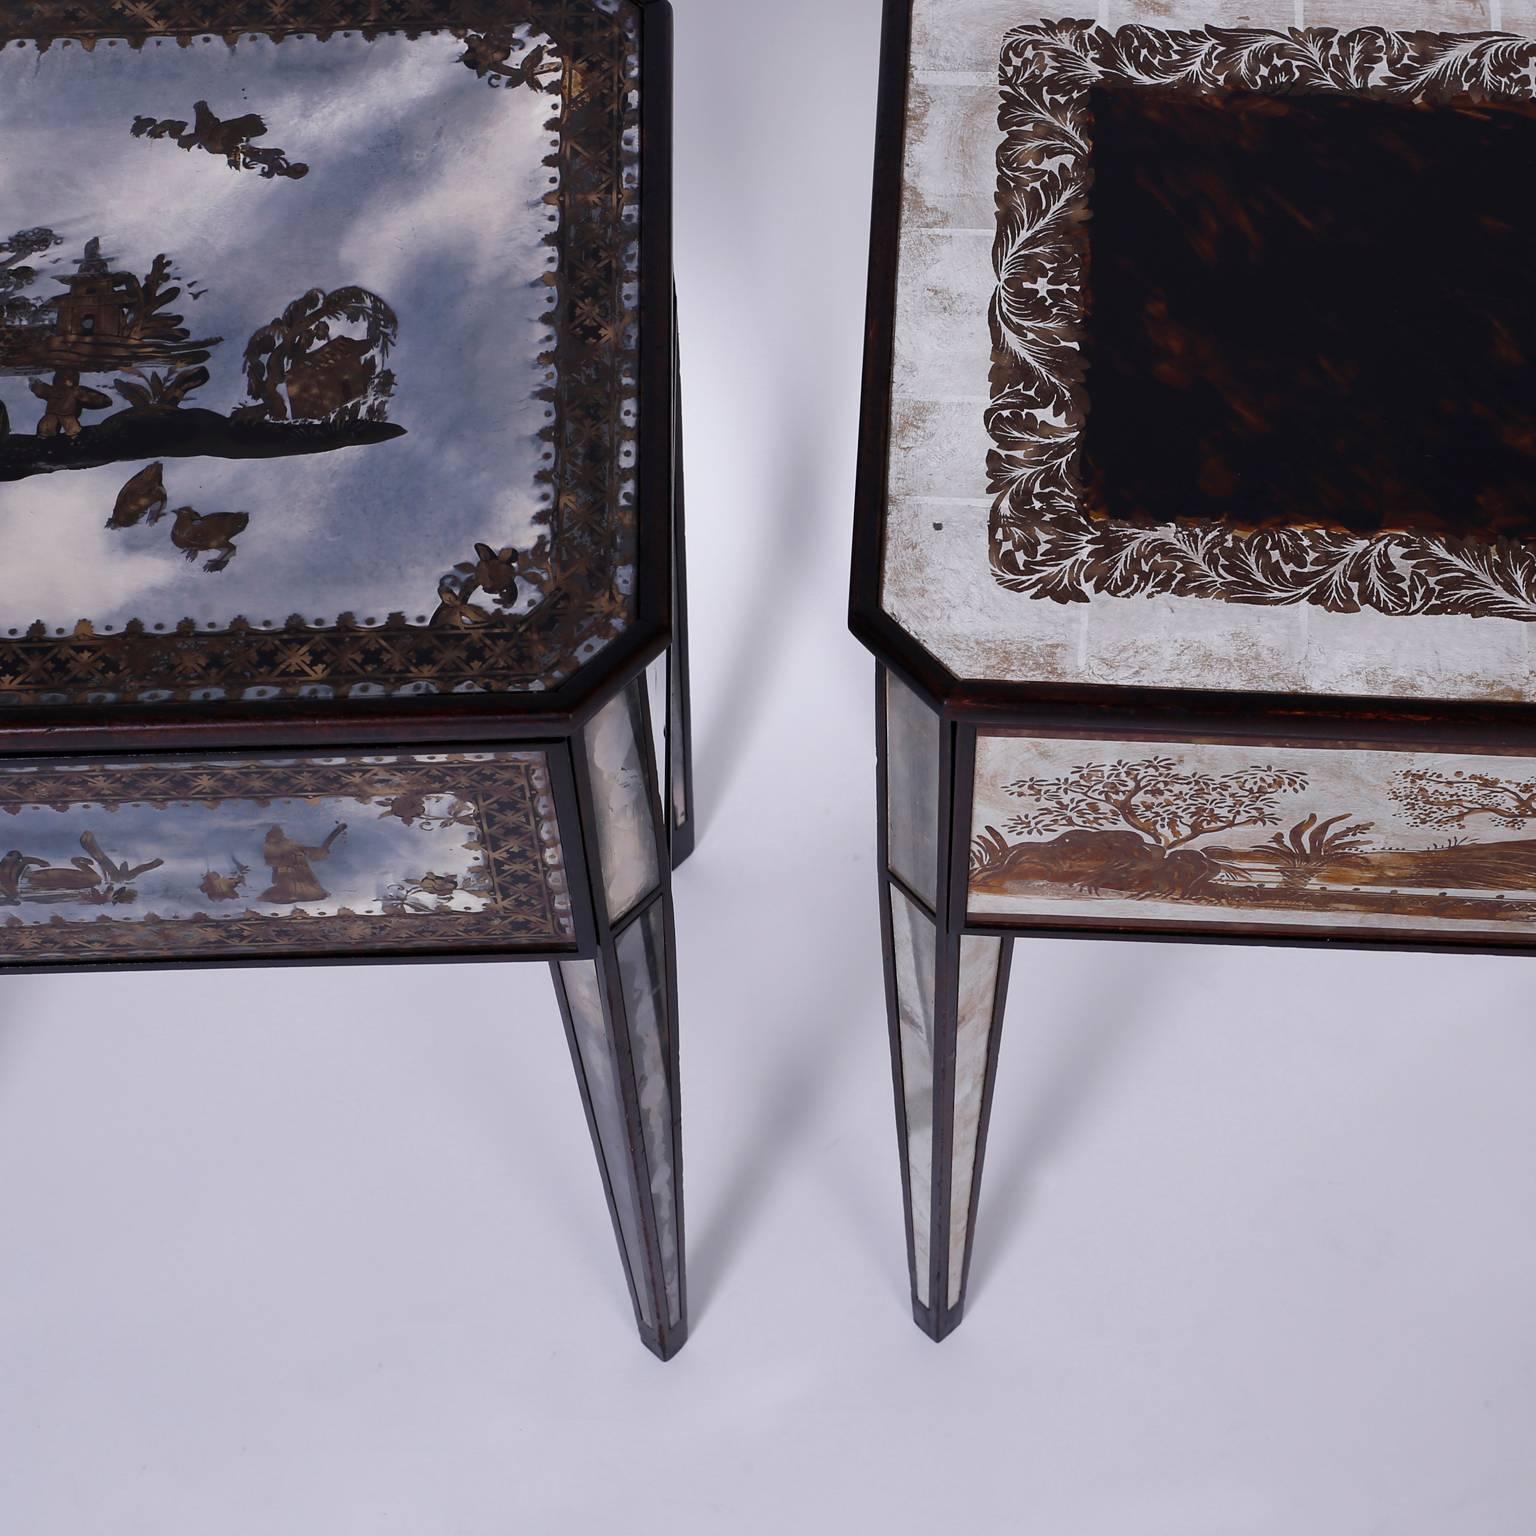 Pair of Italian Mirrored Nightstands or End Tables with a Chinoiserie Motif 1